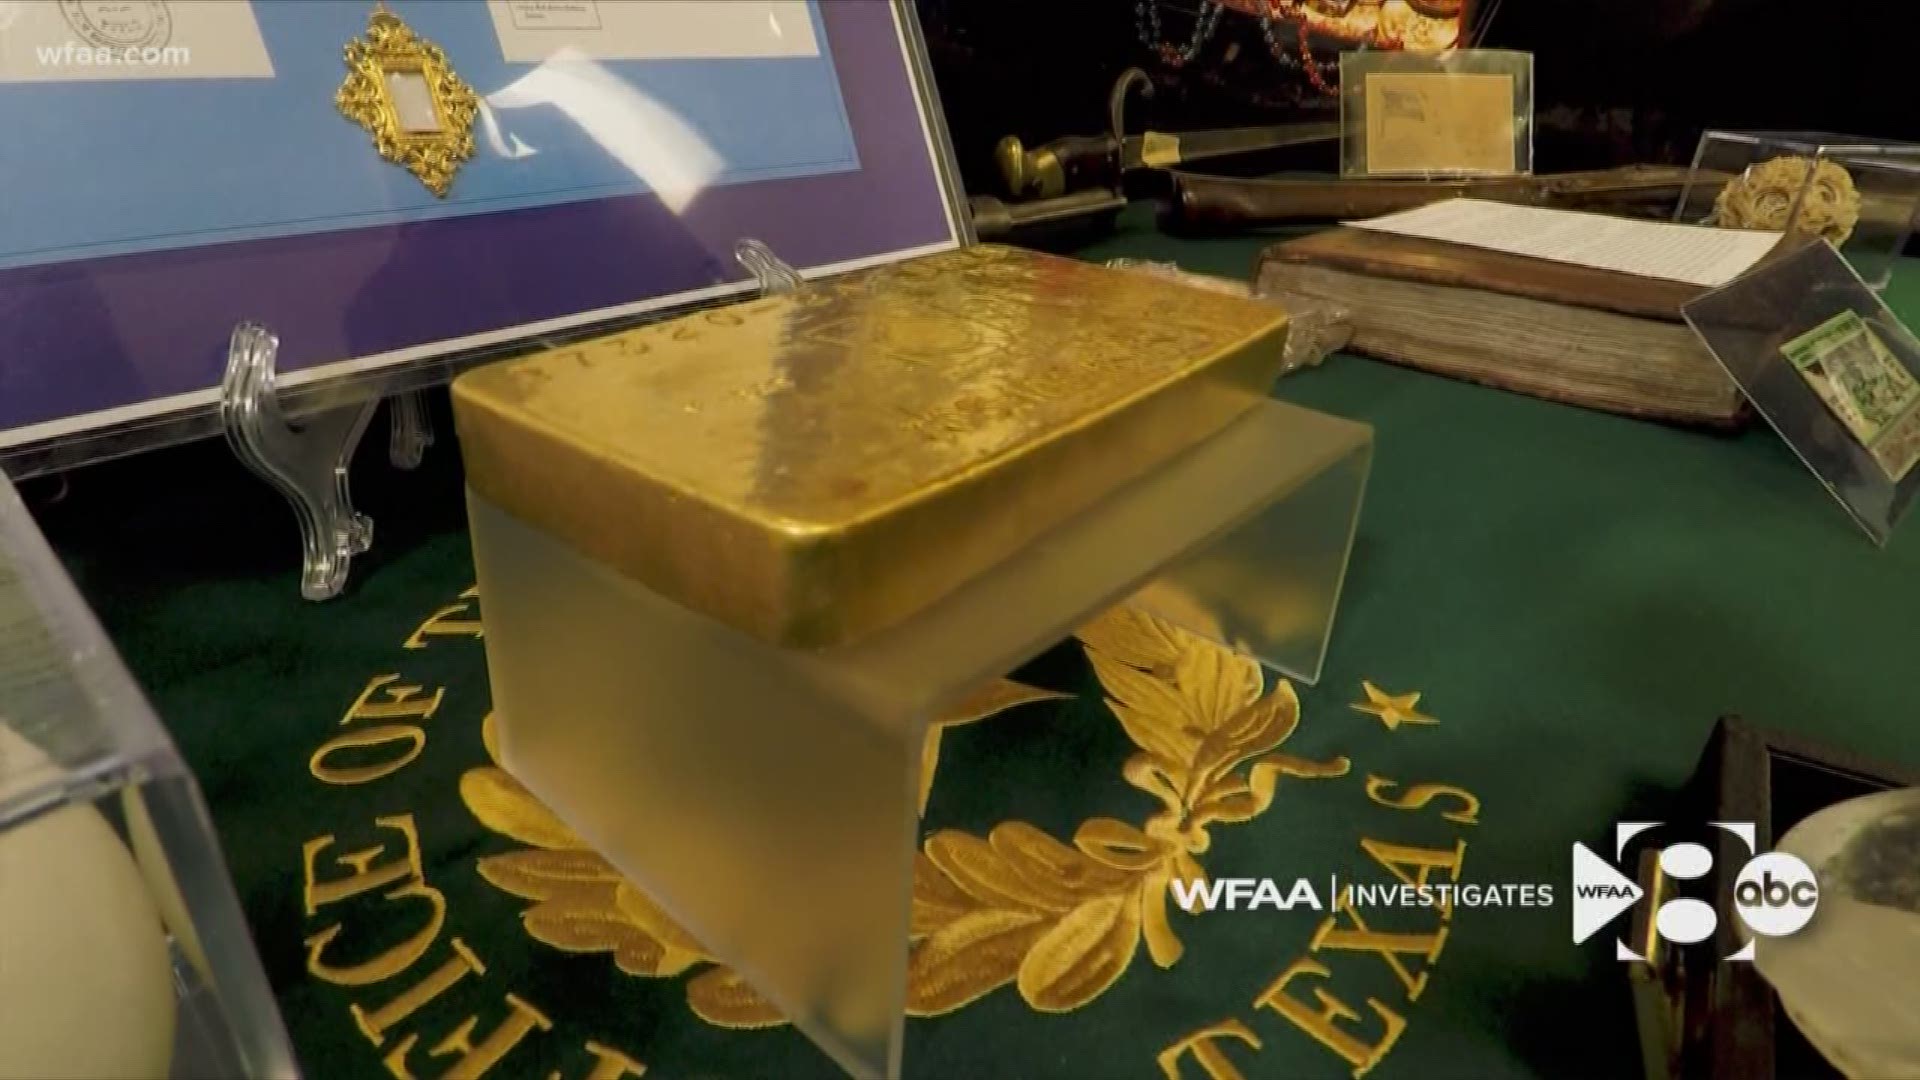 There is a vault in Texas full of unclaimed valuables, including cash.